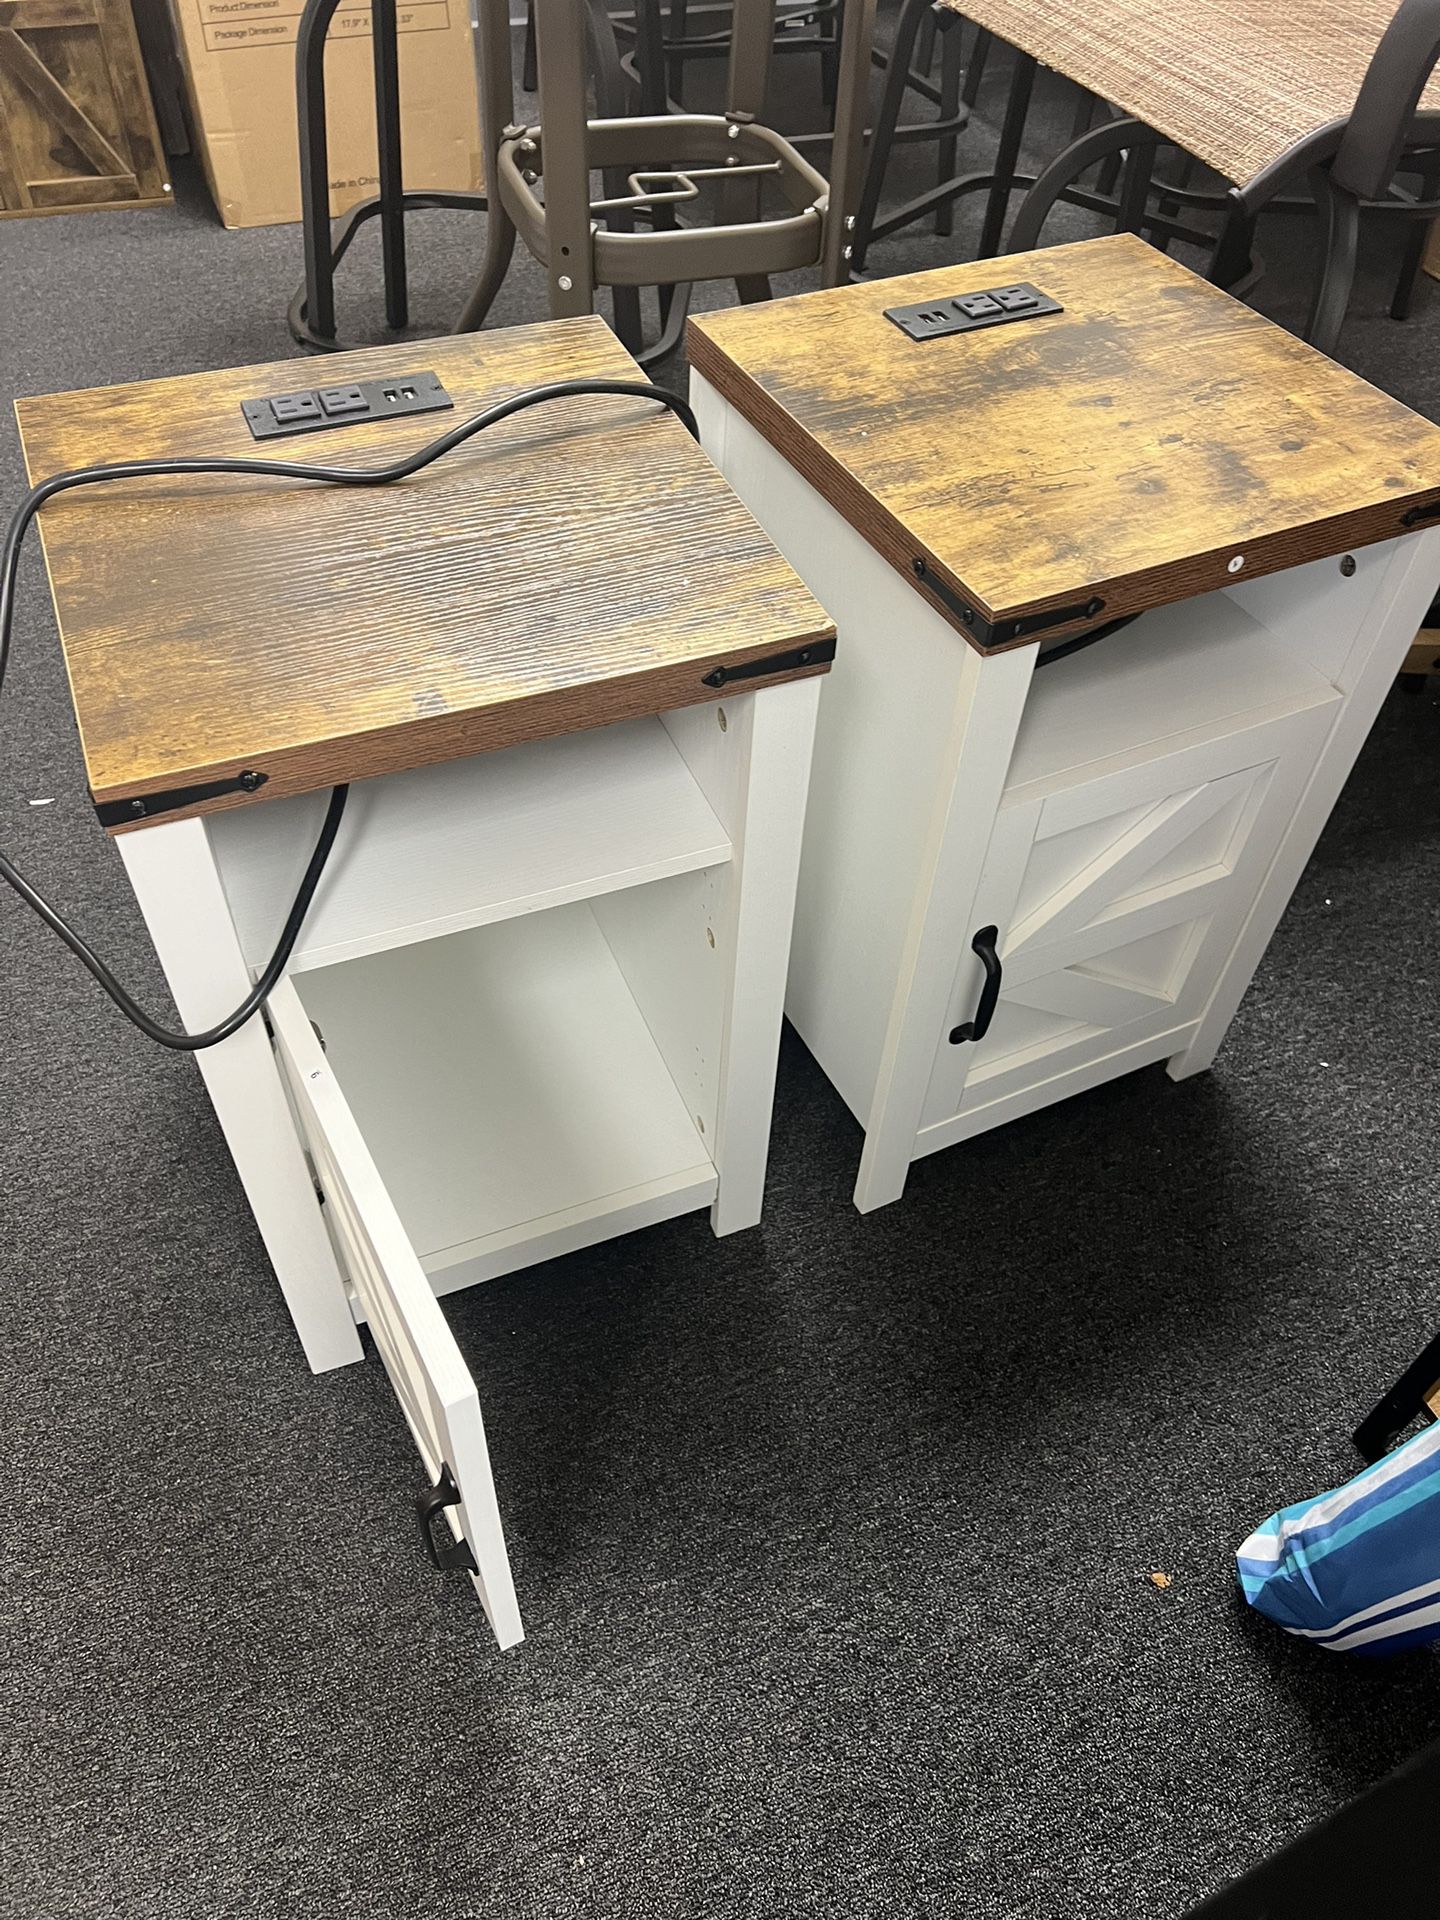 New,2 End Tables /night Stands